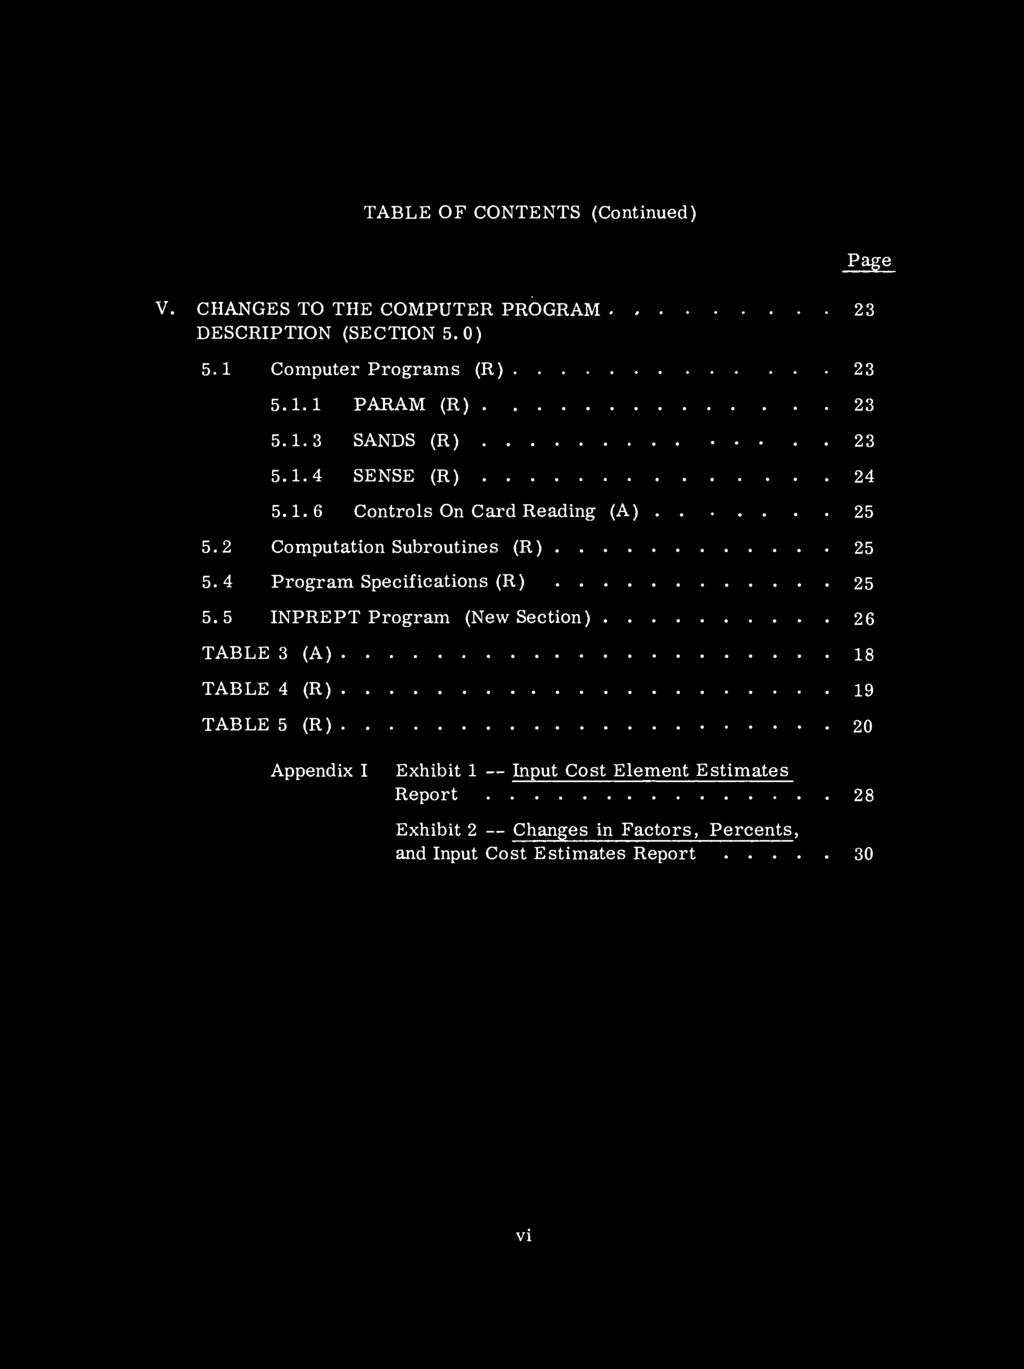 TABLE OF CONTENTS (Continued) V. CHANGES TO THE COMPUTER PROGRAM 23 DESCRIPTION (SECTION 5.0) 5.1 Computer Programs (R) 23 5.1.1 PARAM (R) 23 5.1.3 SANDS (R) 23 5.1.4 SENSE (R) 24 5.1.6 Controls On Card Reading (A) 25 5.